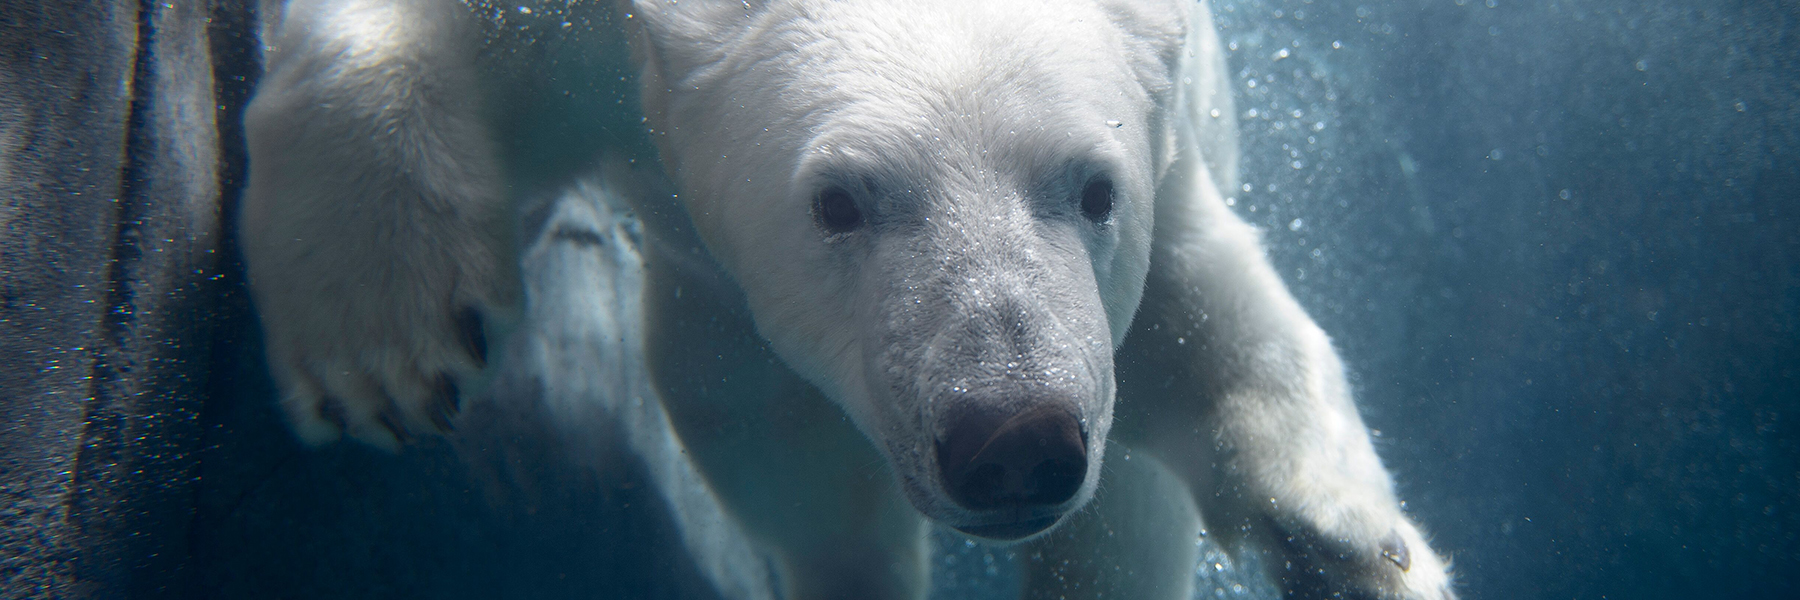 A curious polar bear greets visitors at the St. Louis Zoo.